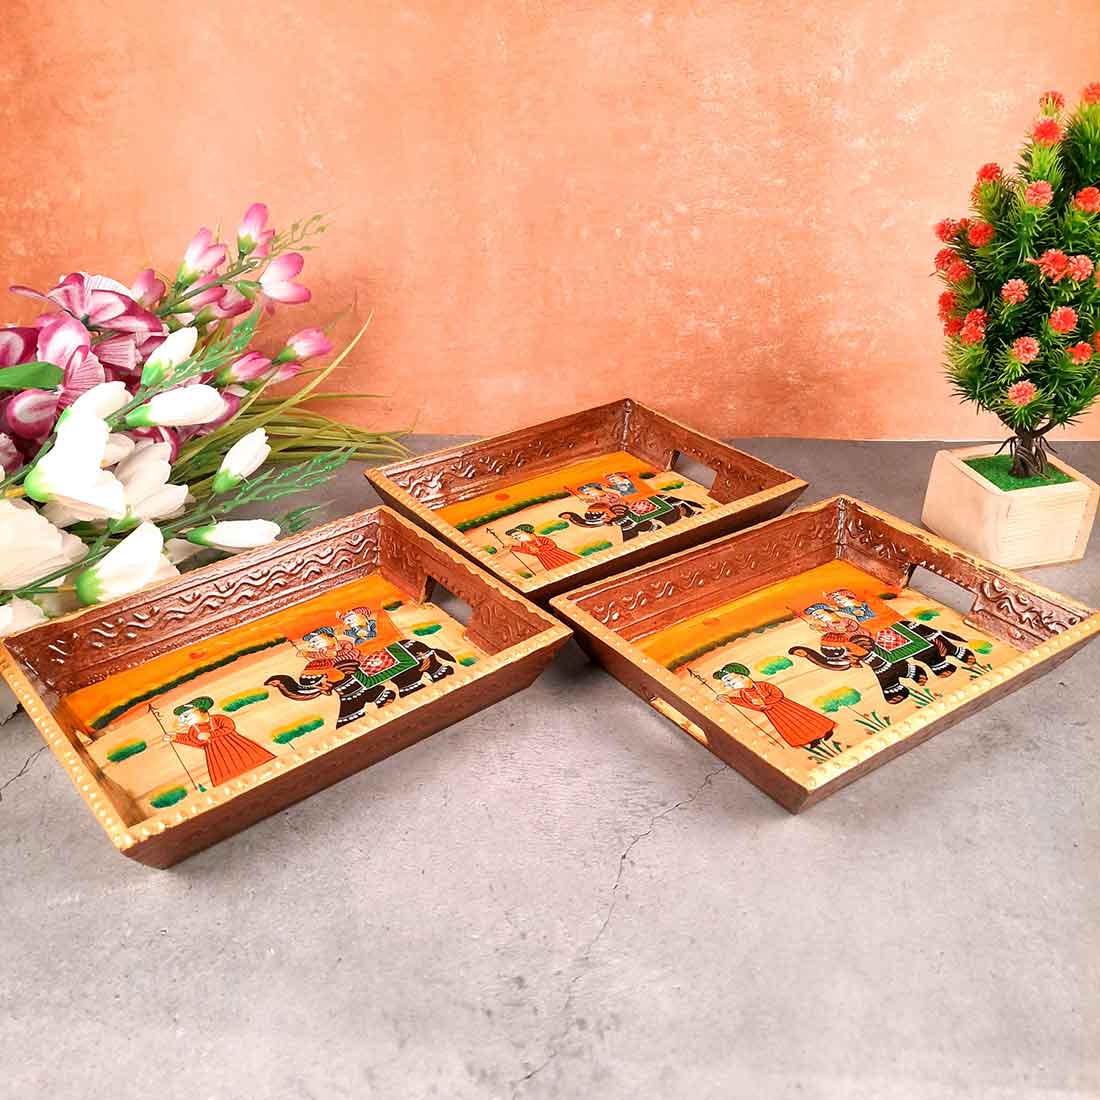 Decorative Tray | Wooden Serving Tray - For Tea & Snack Serving and Organising - 9 Inch - Apkamart#Style_Pack of 3